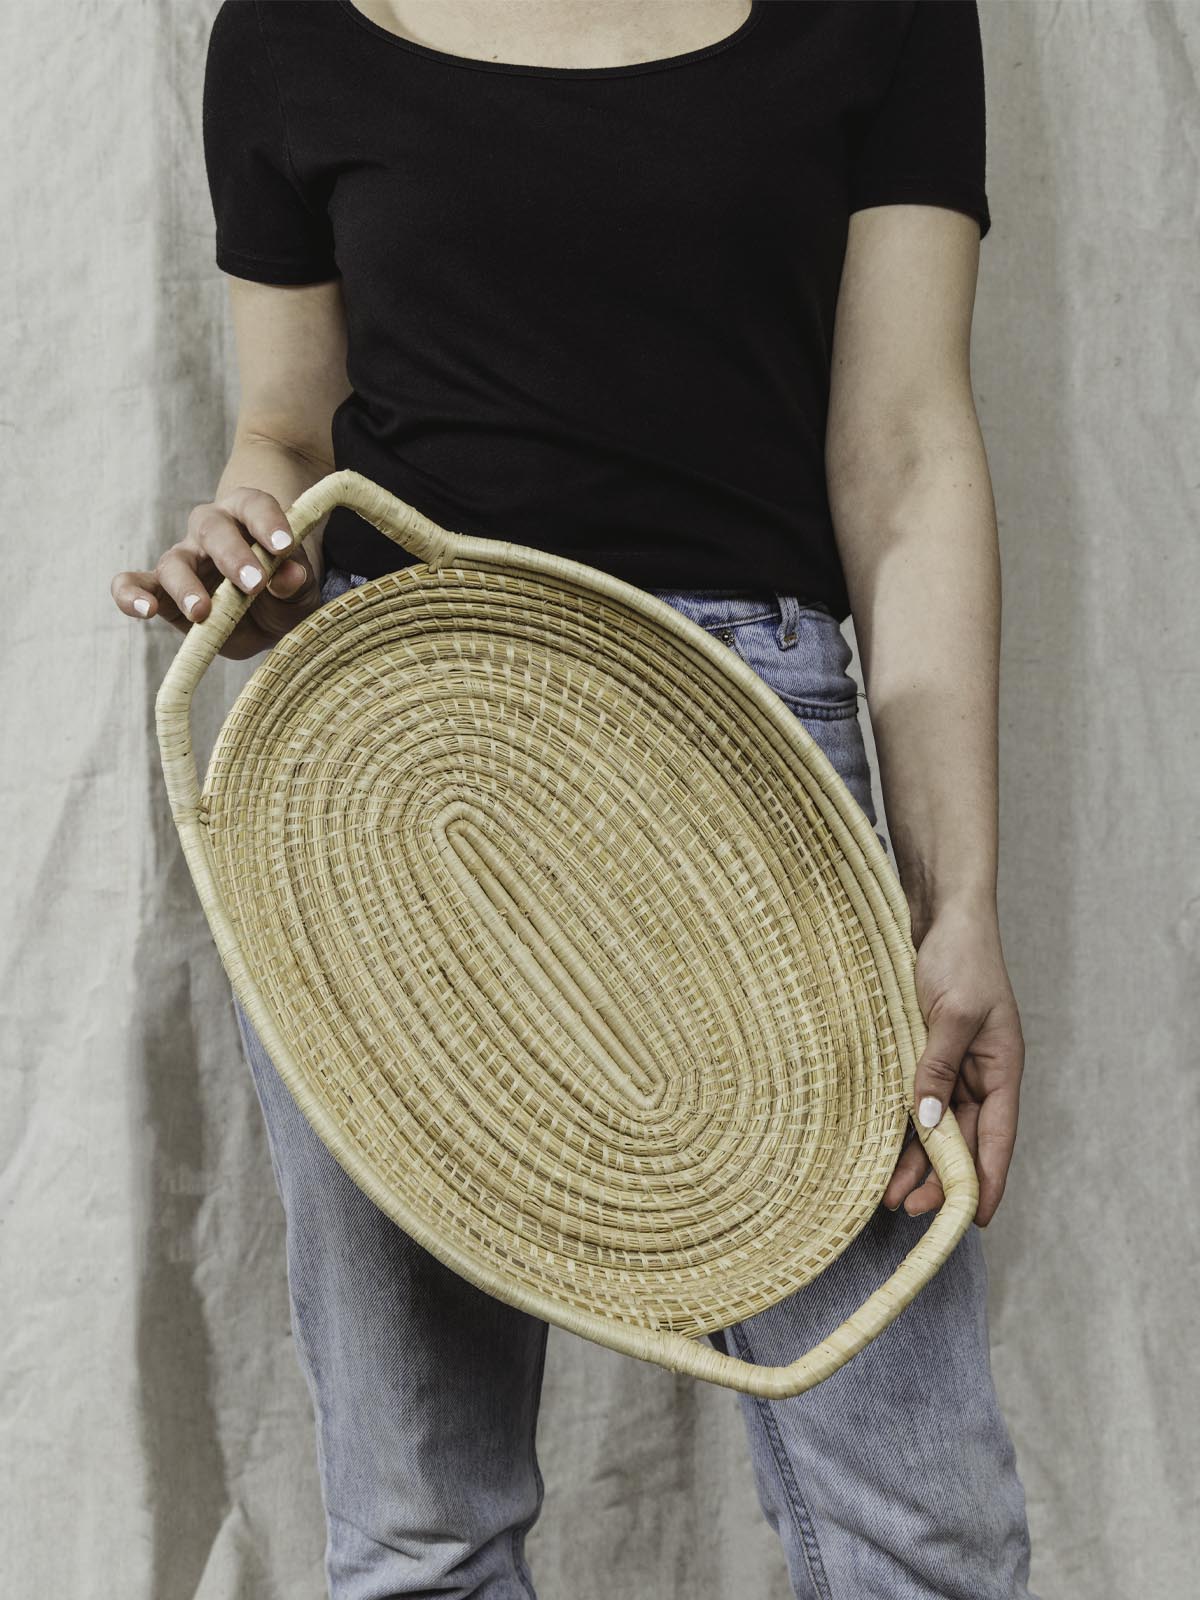 model holding large woven serving tray in a light tan color